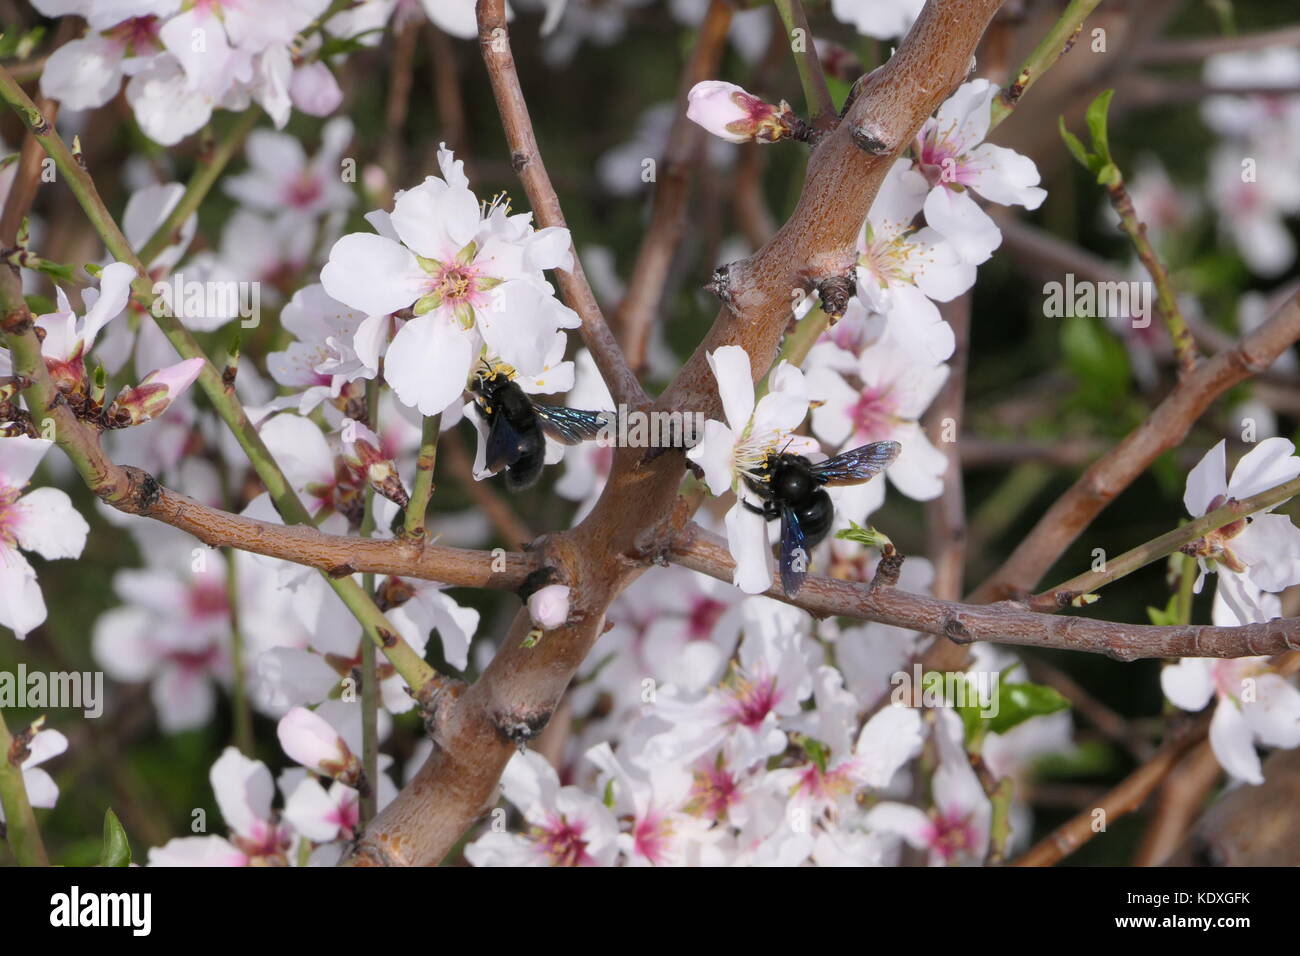 Black carpenter bees flying and white almond tree flowers Stock Photo